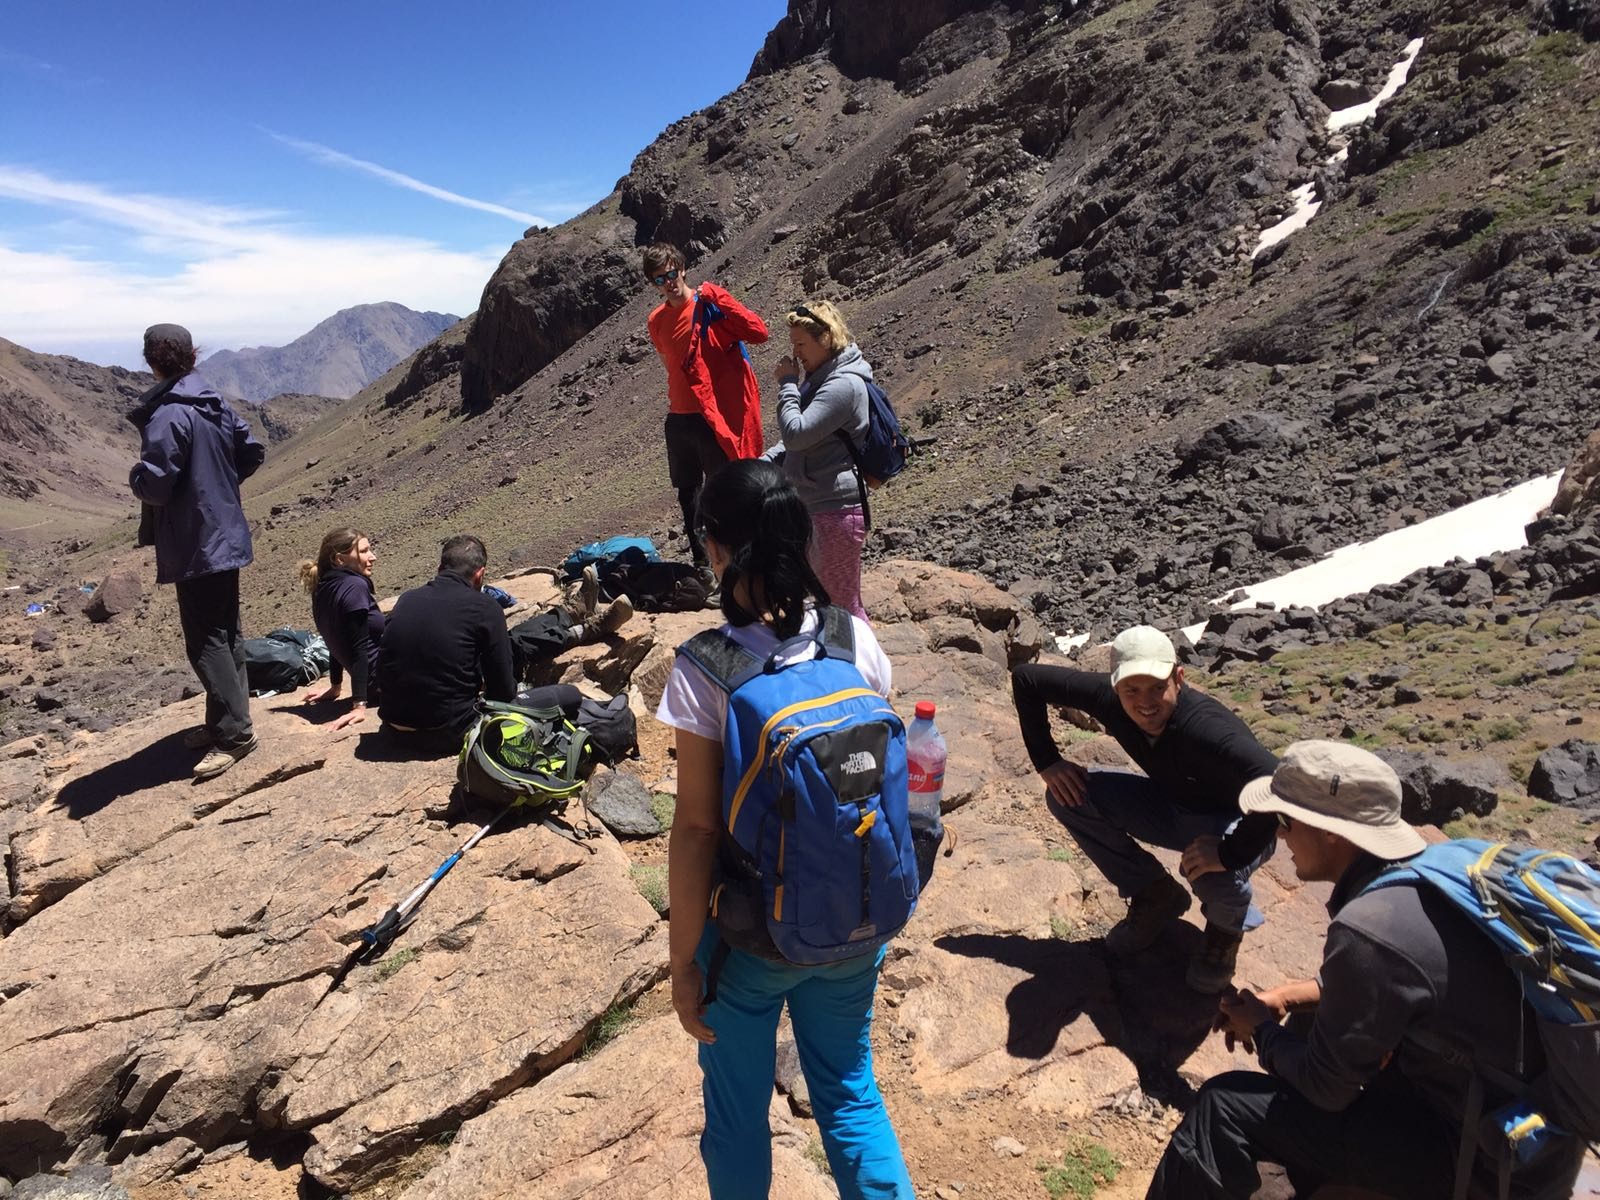 A group of climbers taking on the ascent up Mount Toubkal.